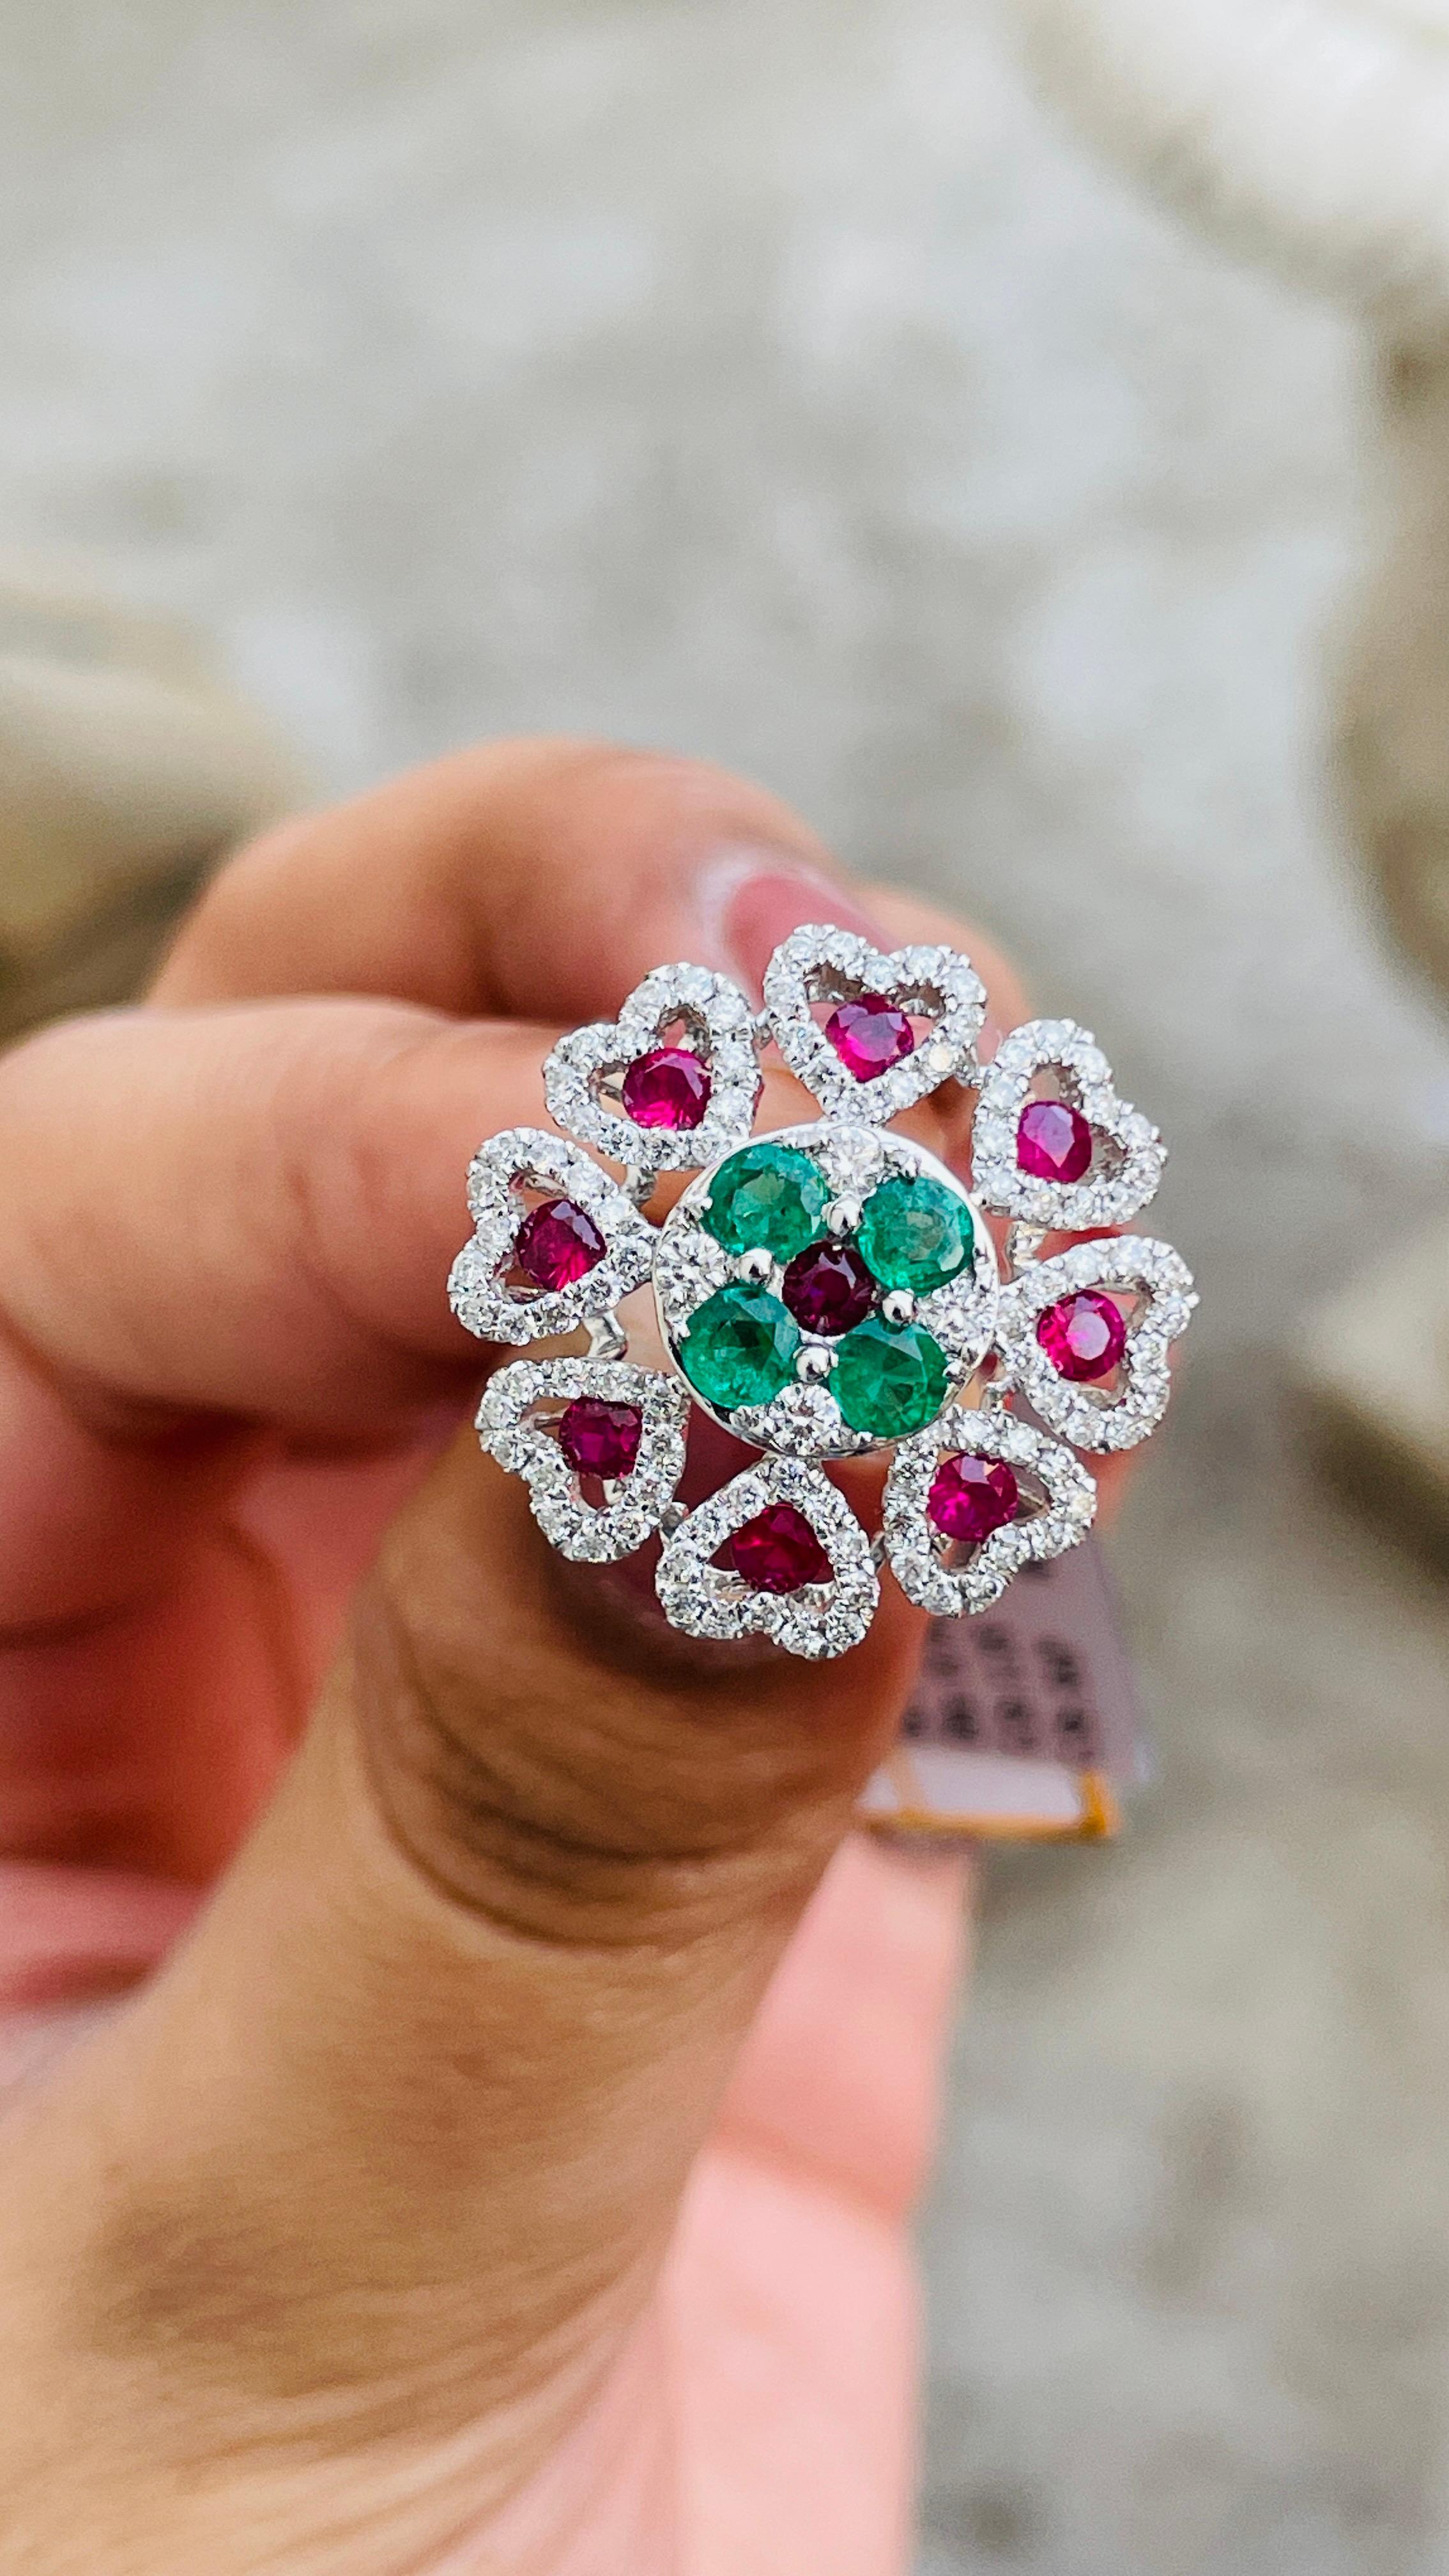 For Sale:  14K White Gold Emerald and Ruby Floral Cocktail Ring with Diamonds 7